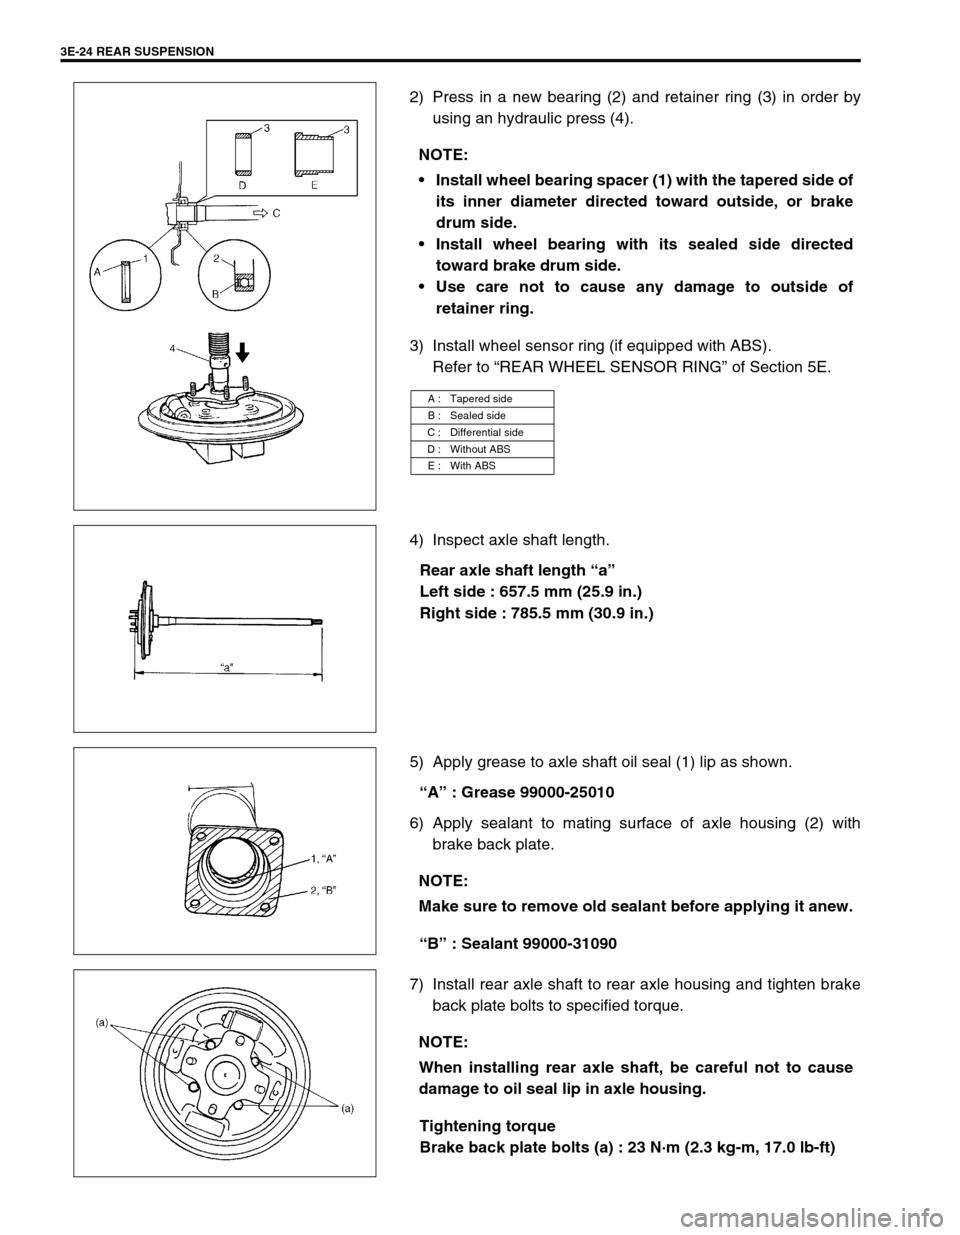 SUZUKI SWIFT 2000 1.G RG413 Service Workshop Manual 3E-24 REAR SUSPENSION
2) Press in a new bearing (2) and retainer ring (3) in order by
using an hydraulic press (4).
3) Install wheel sensor ring (if equipped with ABS).
Refer to “REAR WHEEL SENSOR R